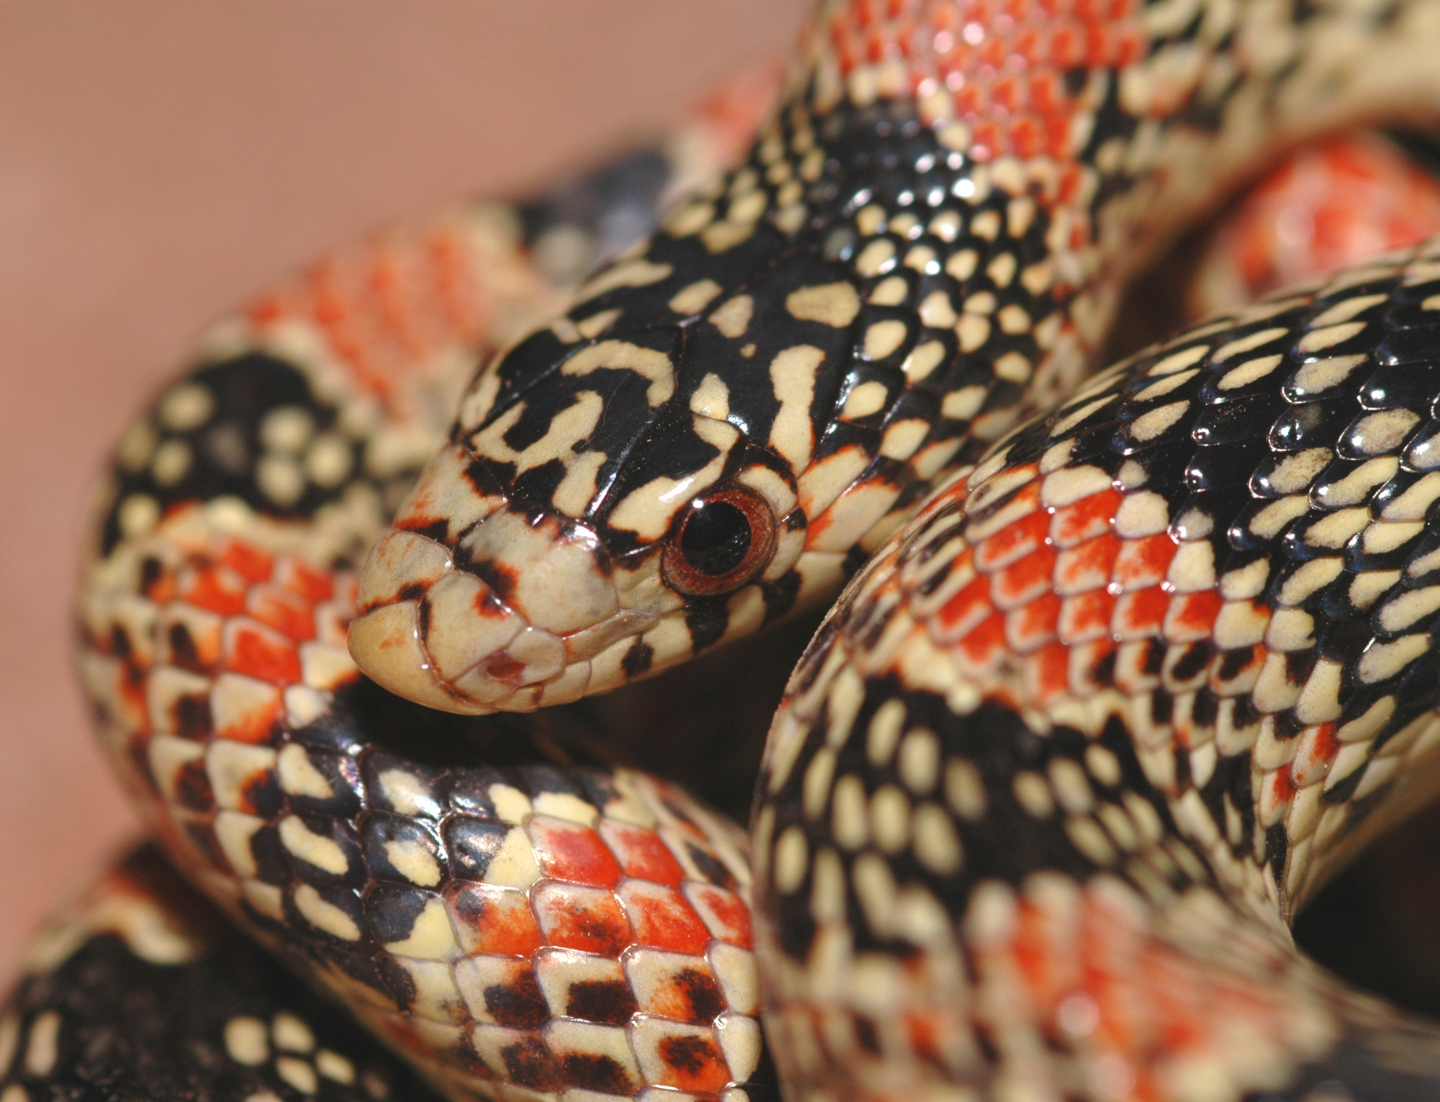 The face of a long-nosed snake, which has blotches of black, white, and red.